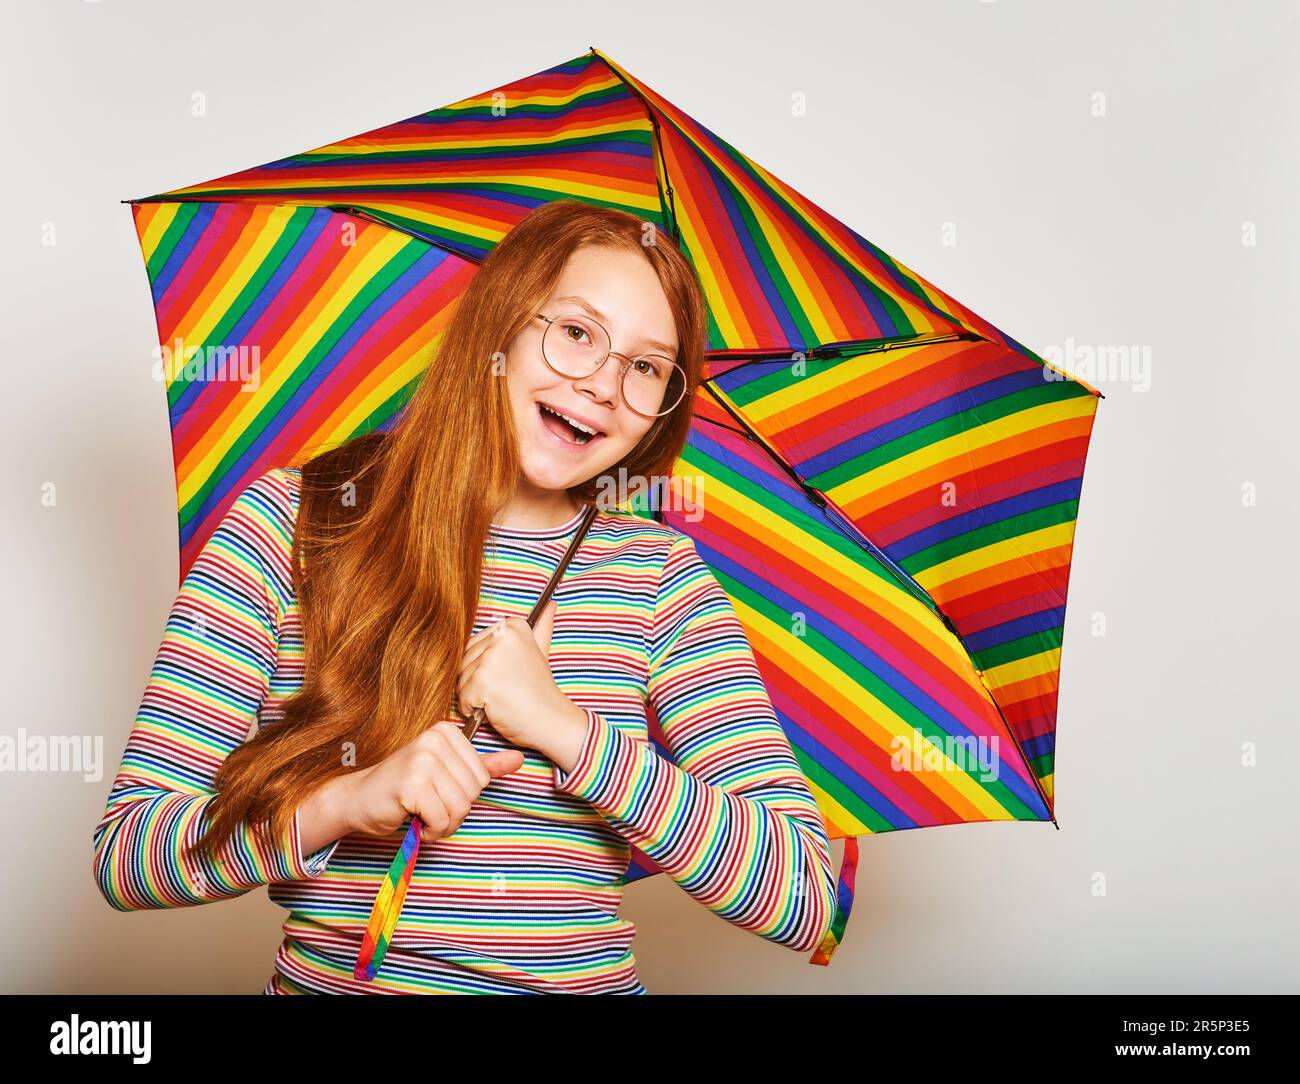 Studio portrait of young red-haired girl holding colorful umbrella Stock Photo